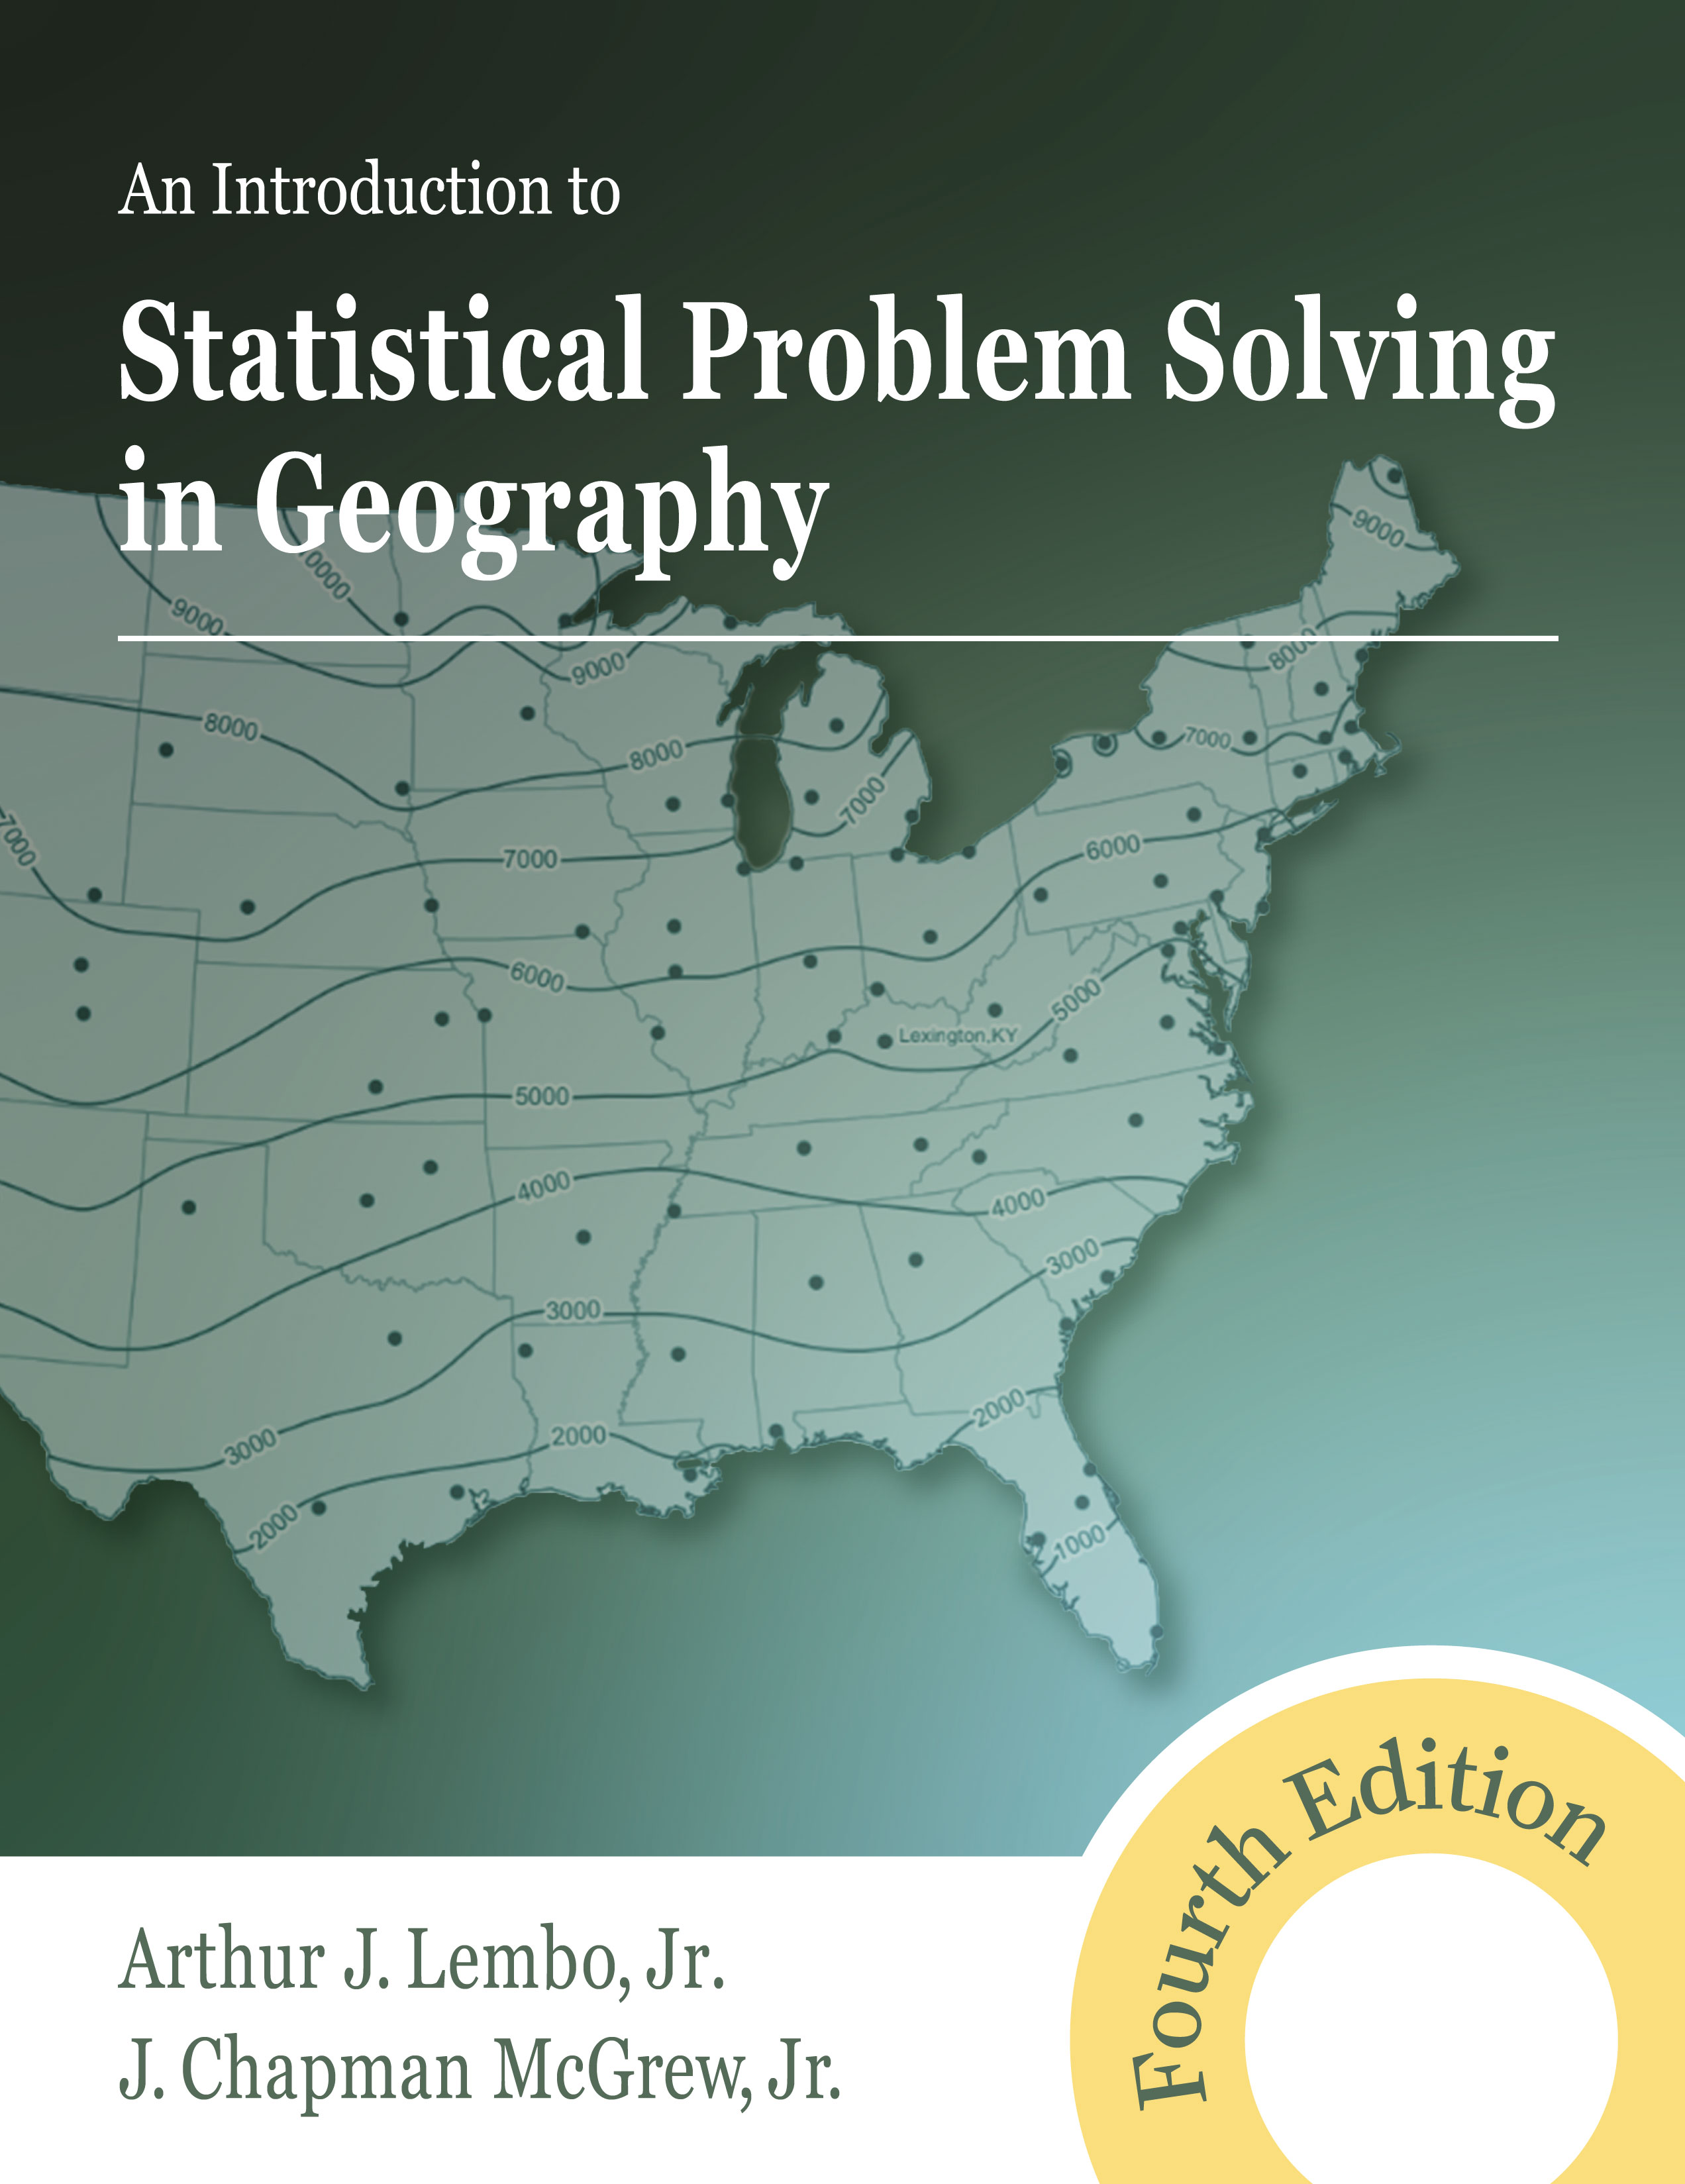 An Introduction to Statistical Problem Solving in Geography:  by Arthur J. Lembo, Jr., J. Chapman McGrew, Jr.